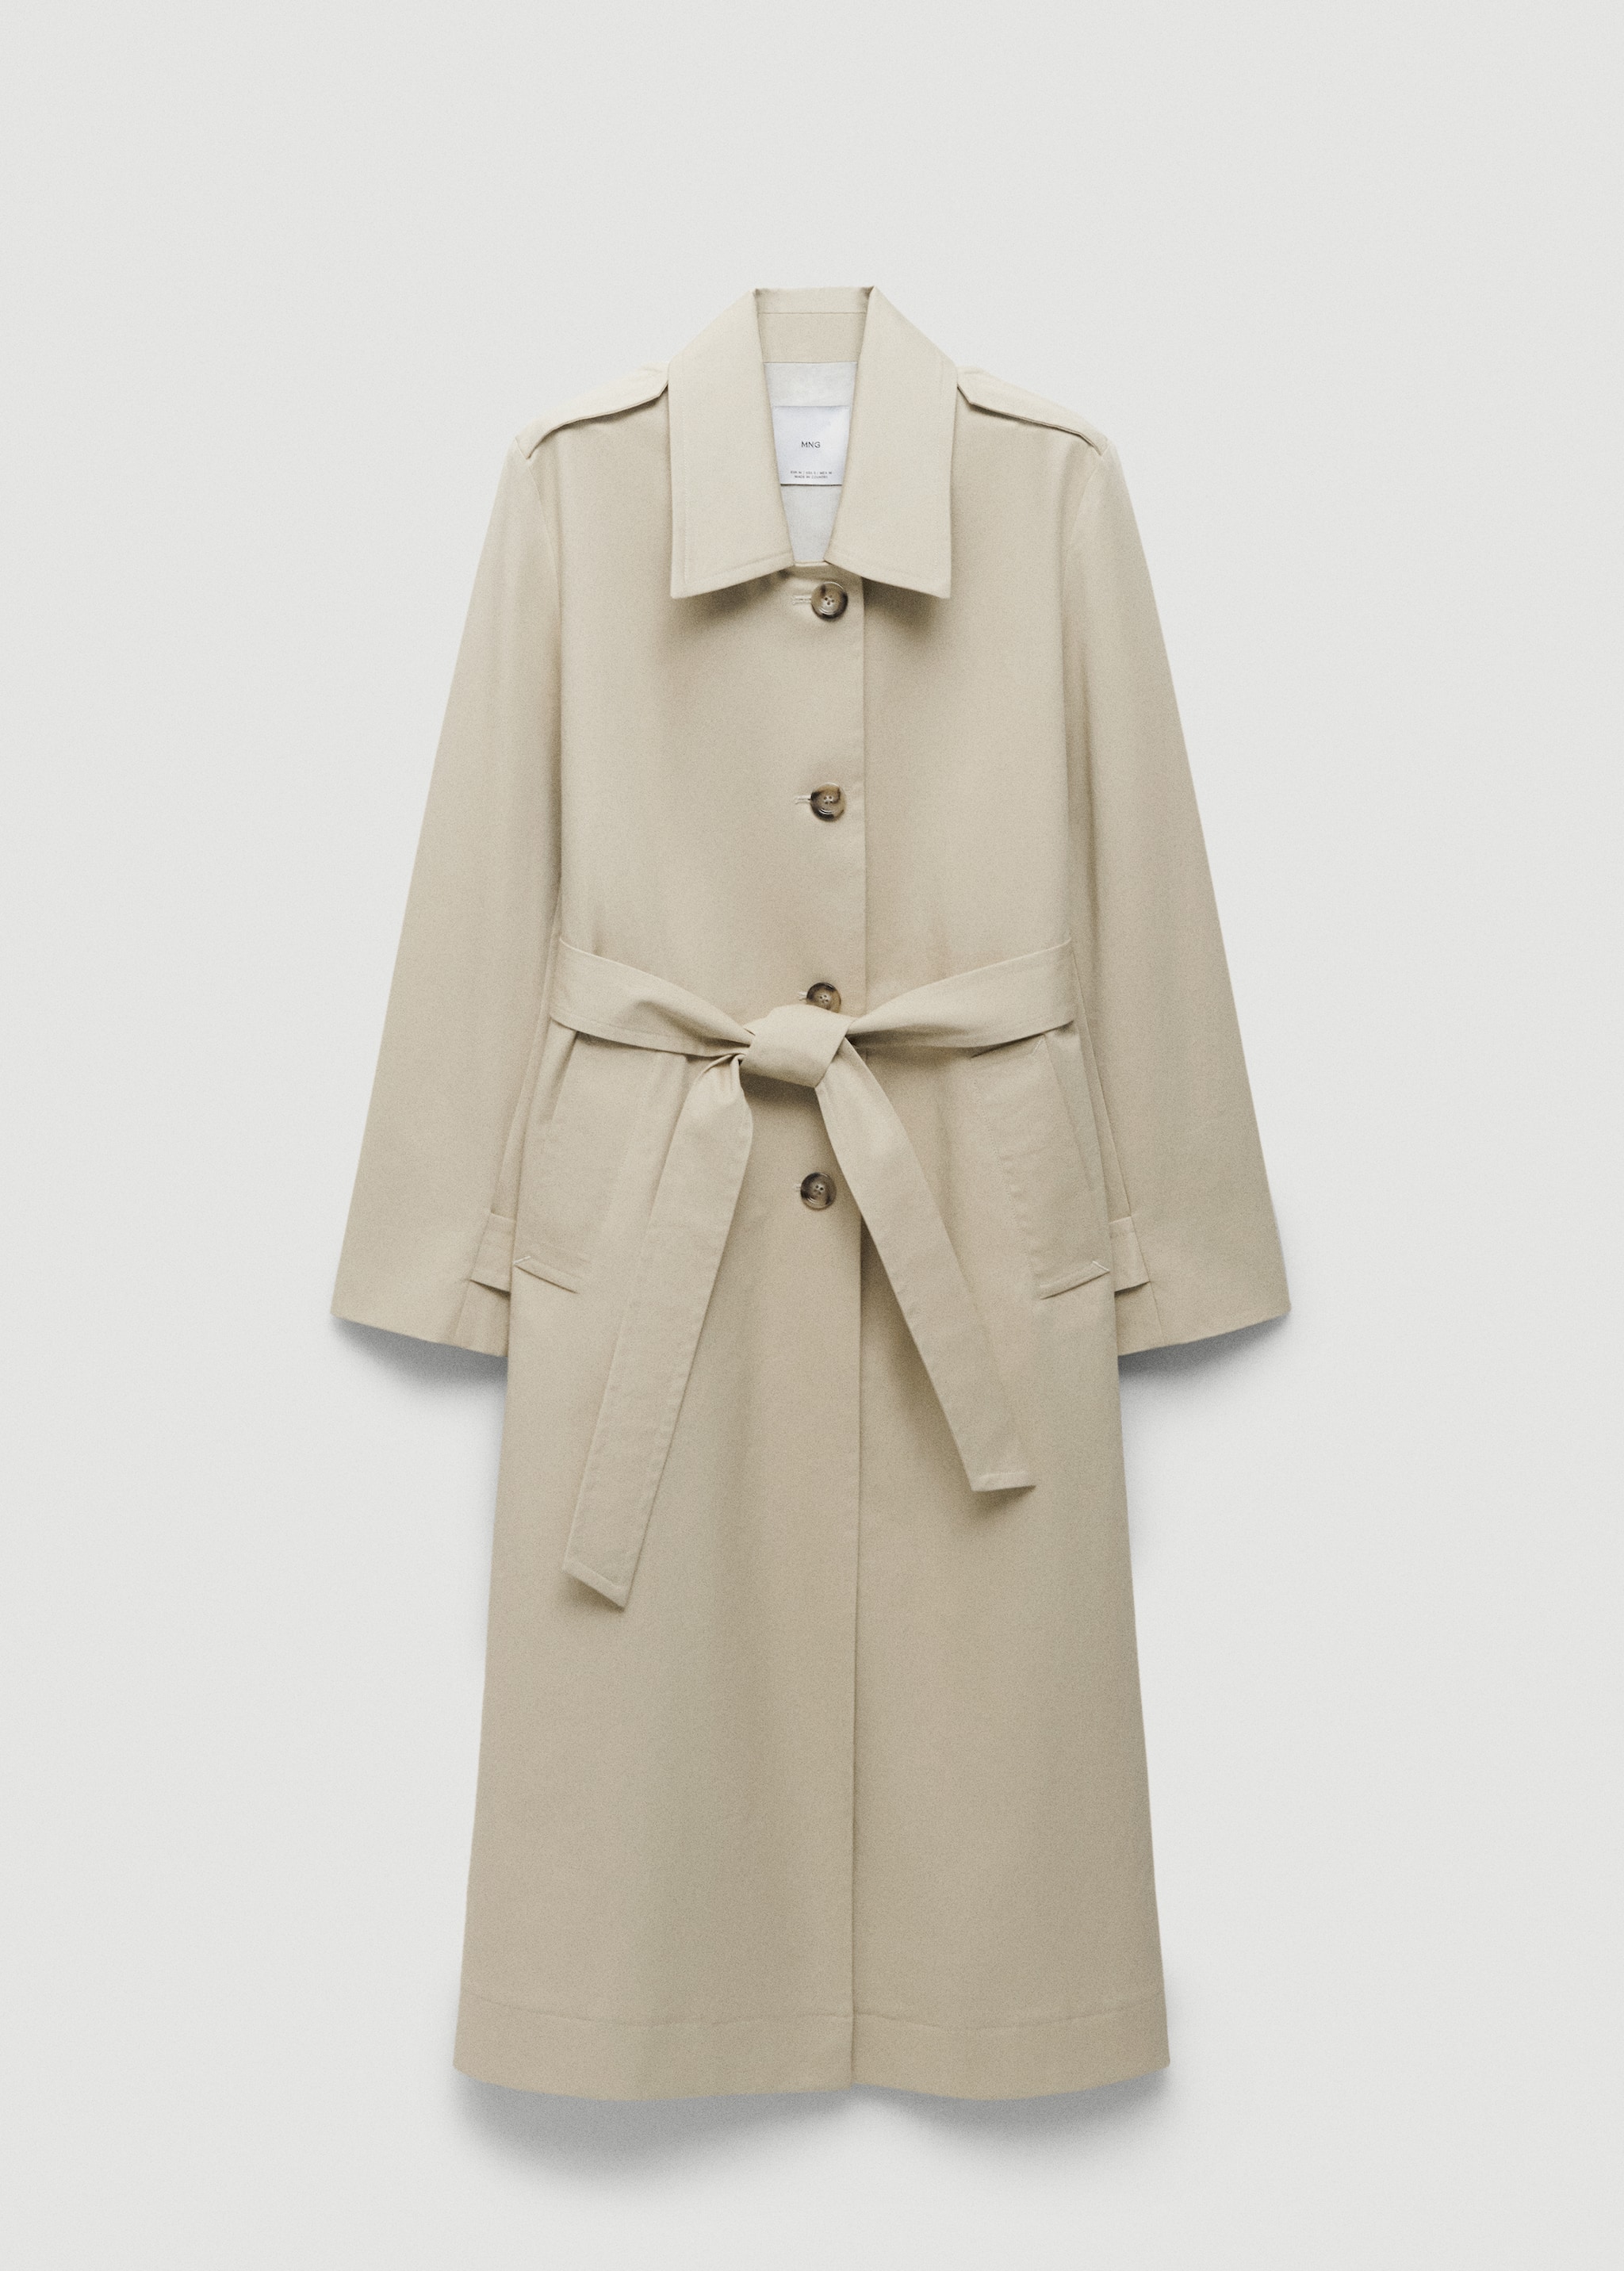 Cotton trench coat with shirt collar - Article without model